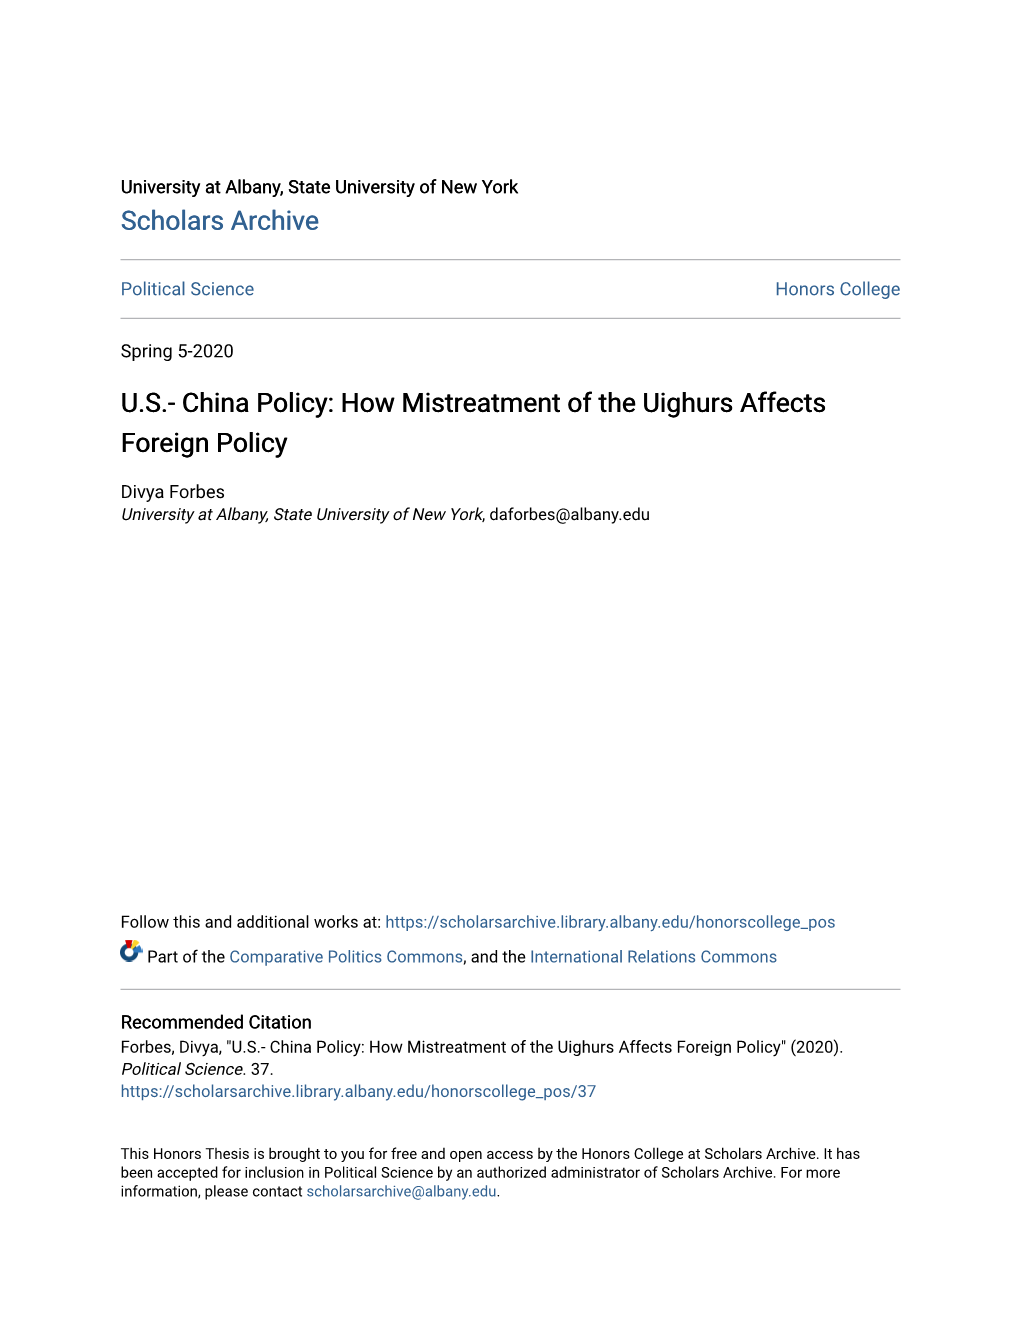 U.S.- China Policy: How Mistreatment of the Uighurs Affects Foreign Policy